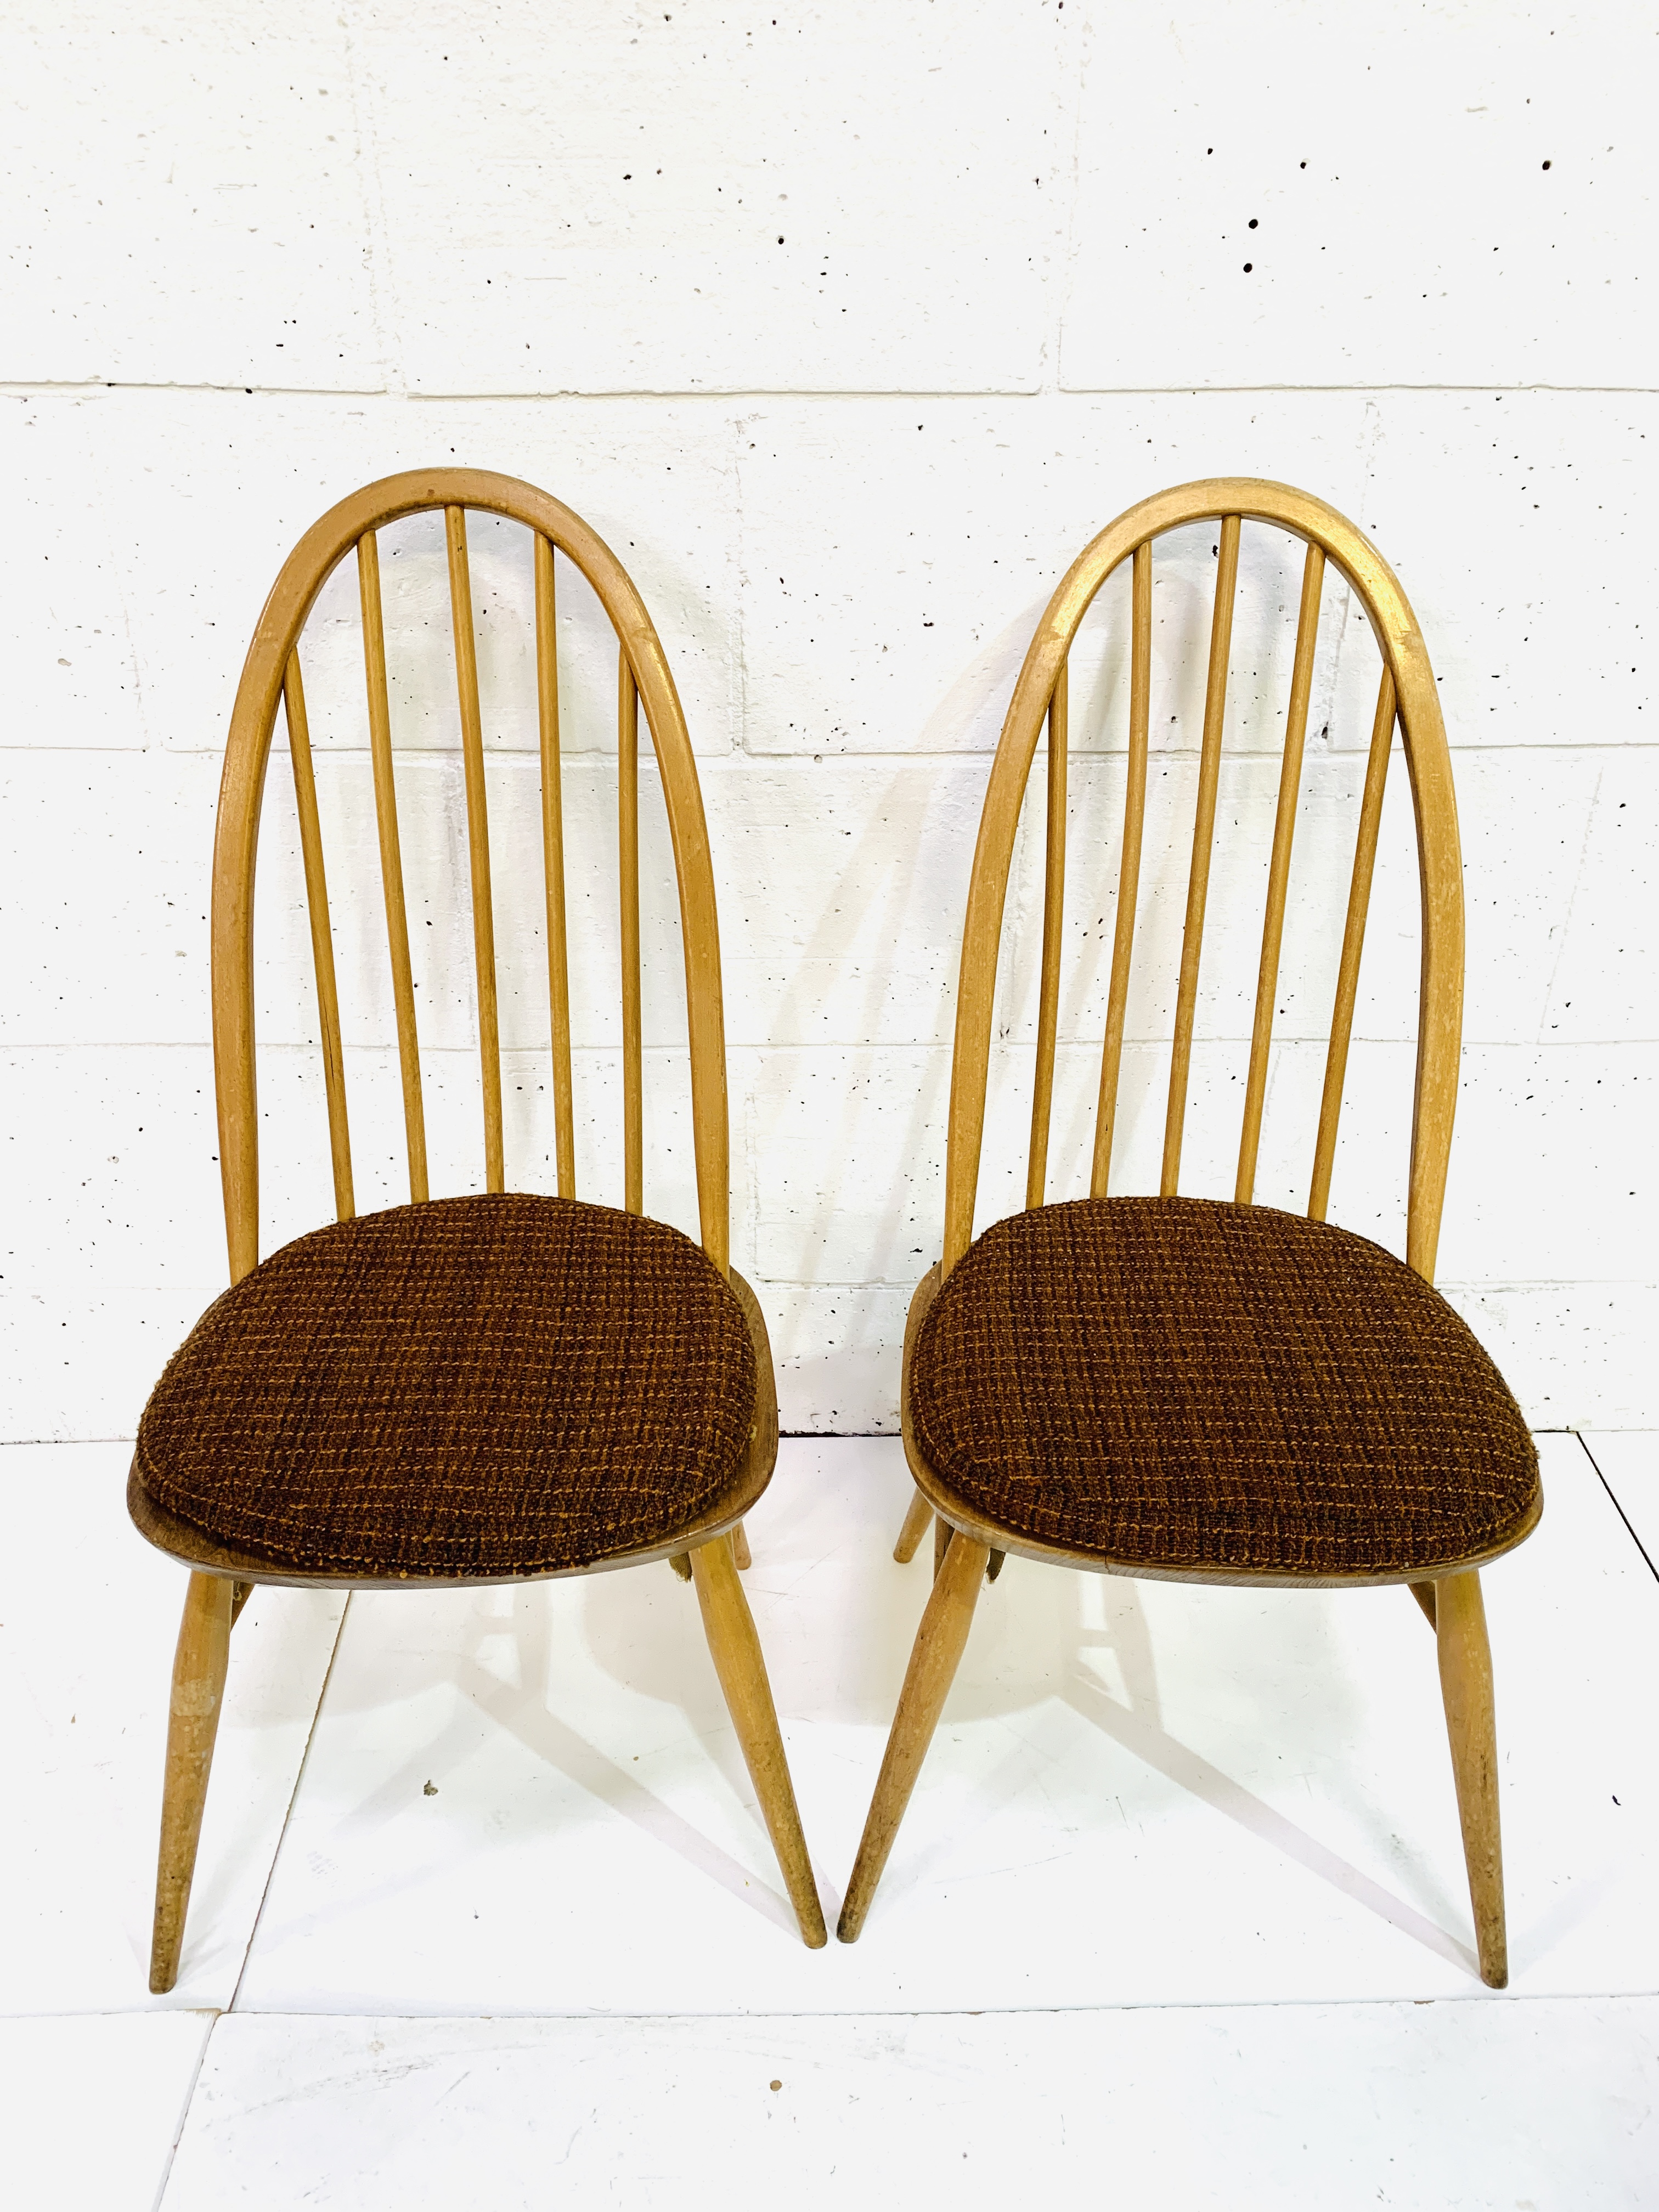 Pair of Ercol rail back chairs - Image 4 of 6